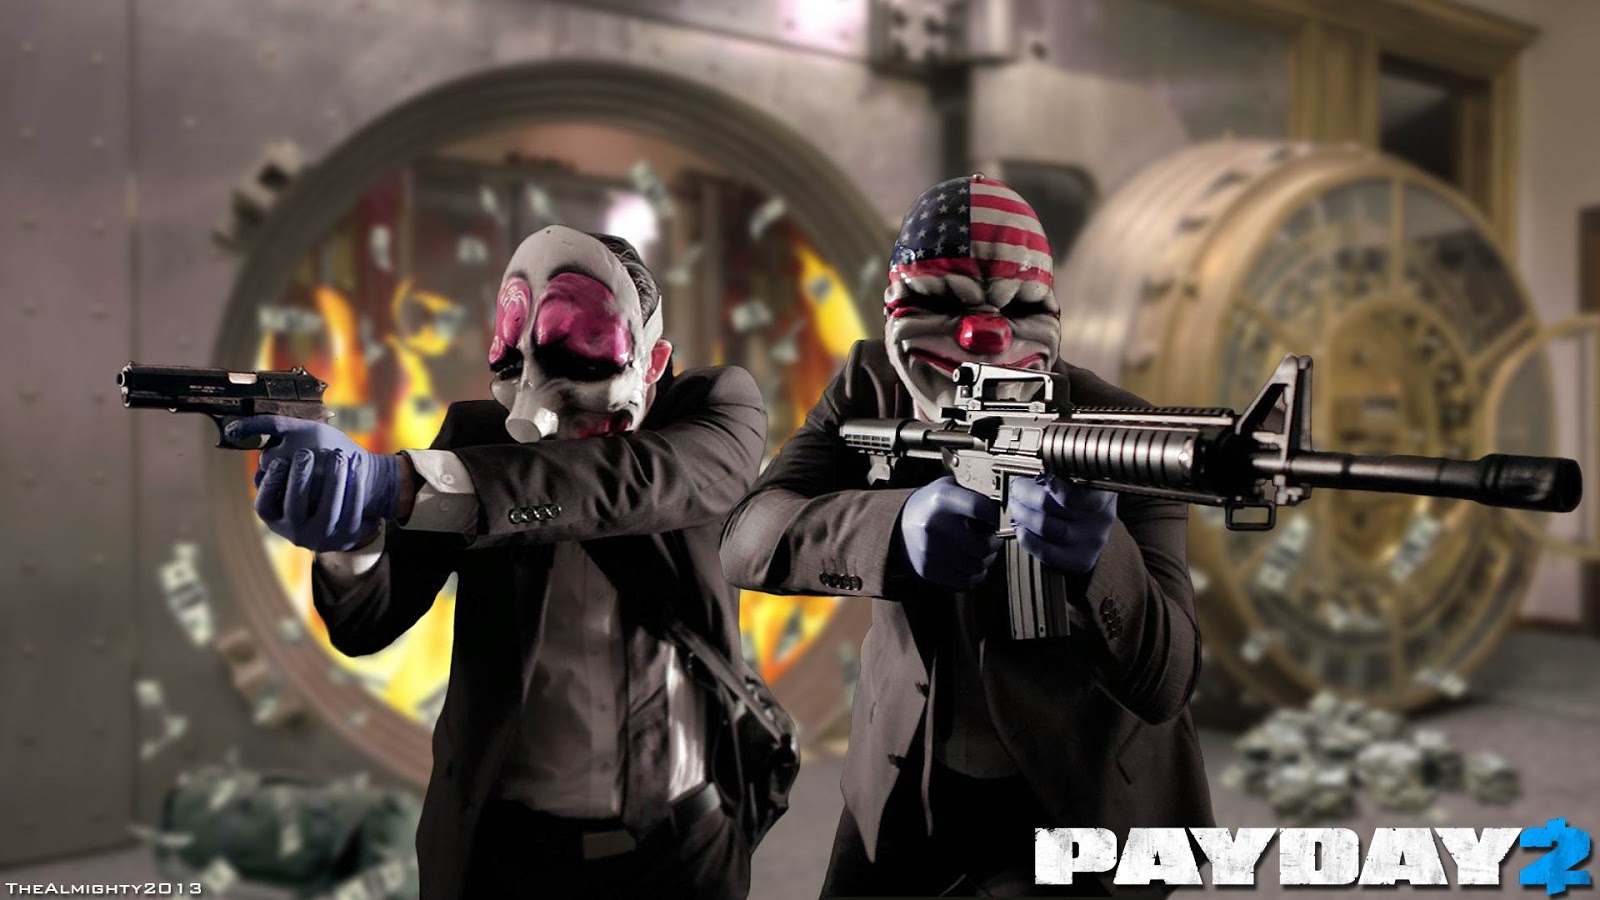 Payday games